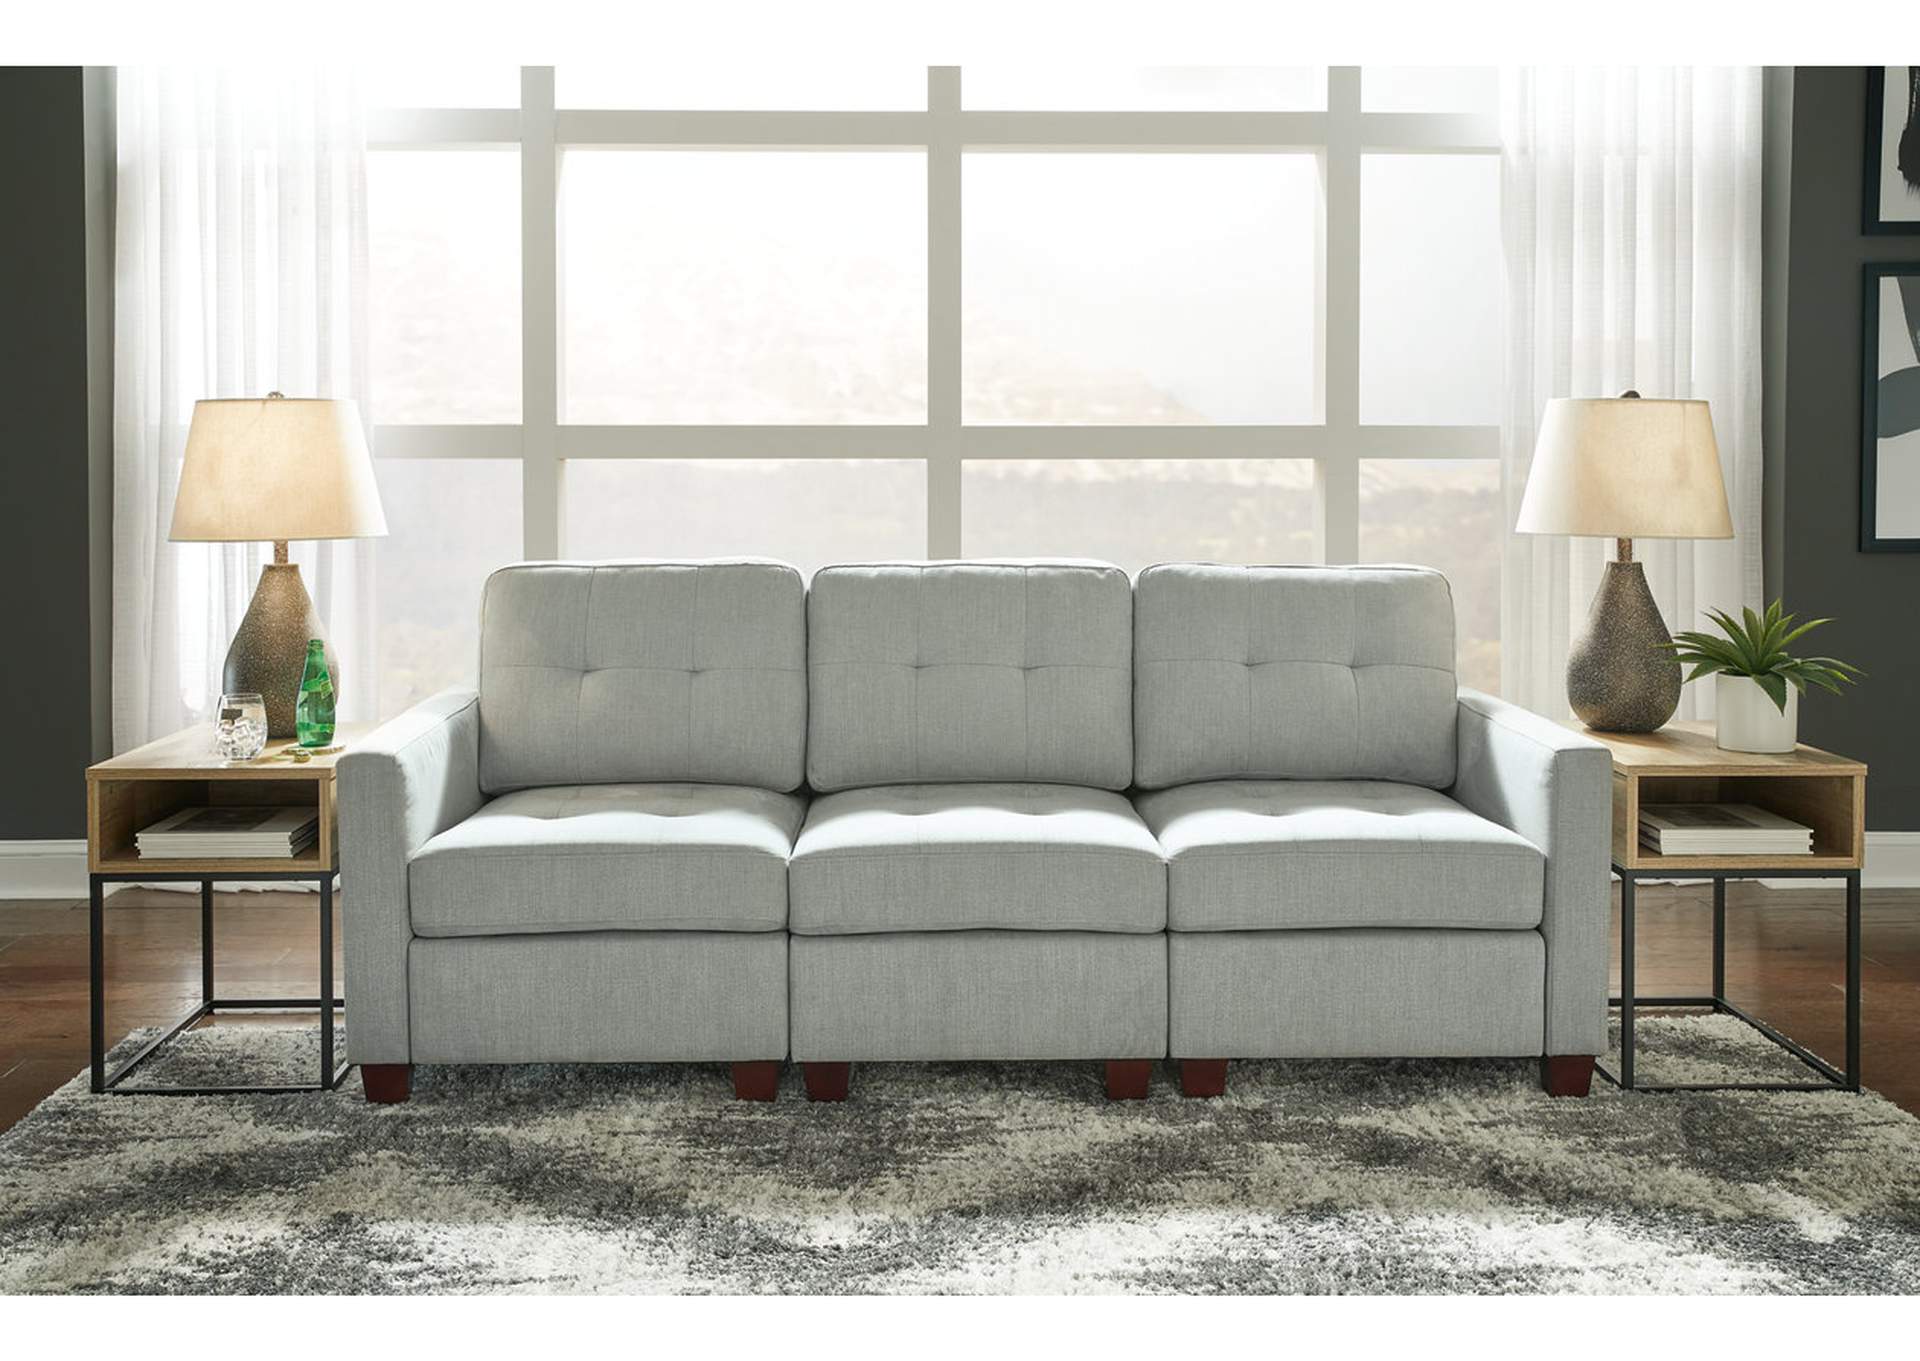 Edlie 3-Piece Sectional,Signature Design By Ashley